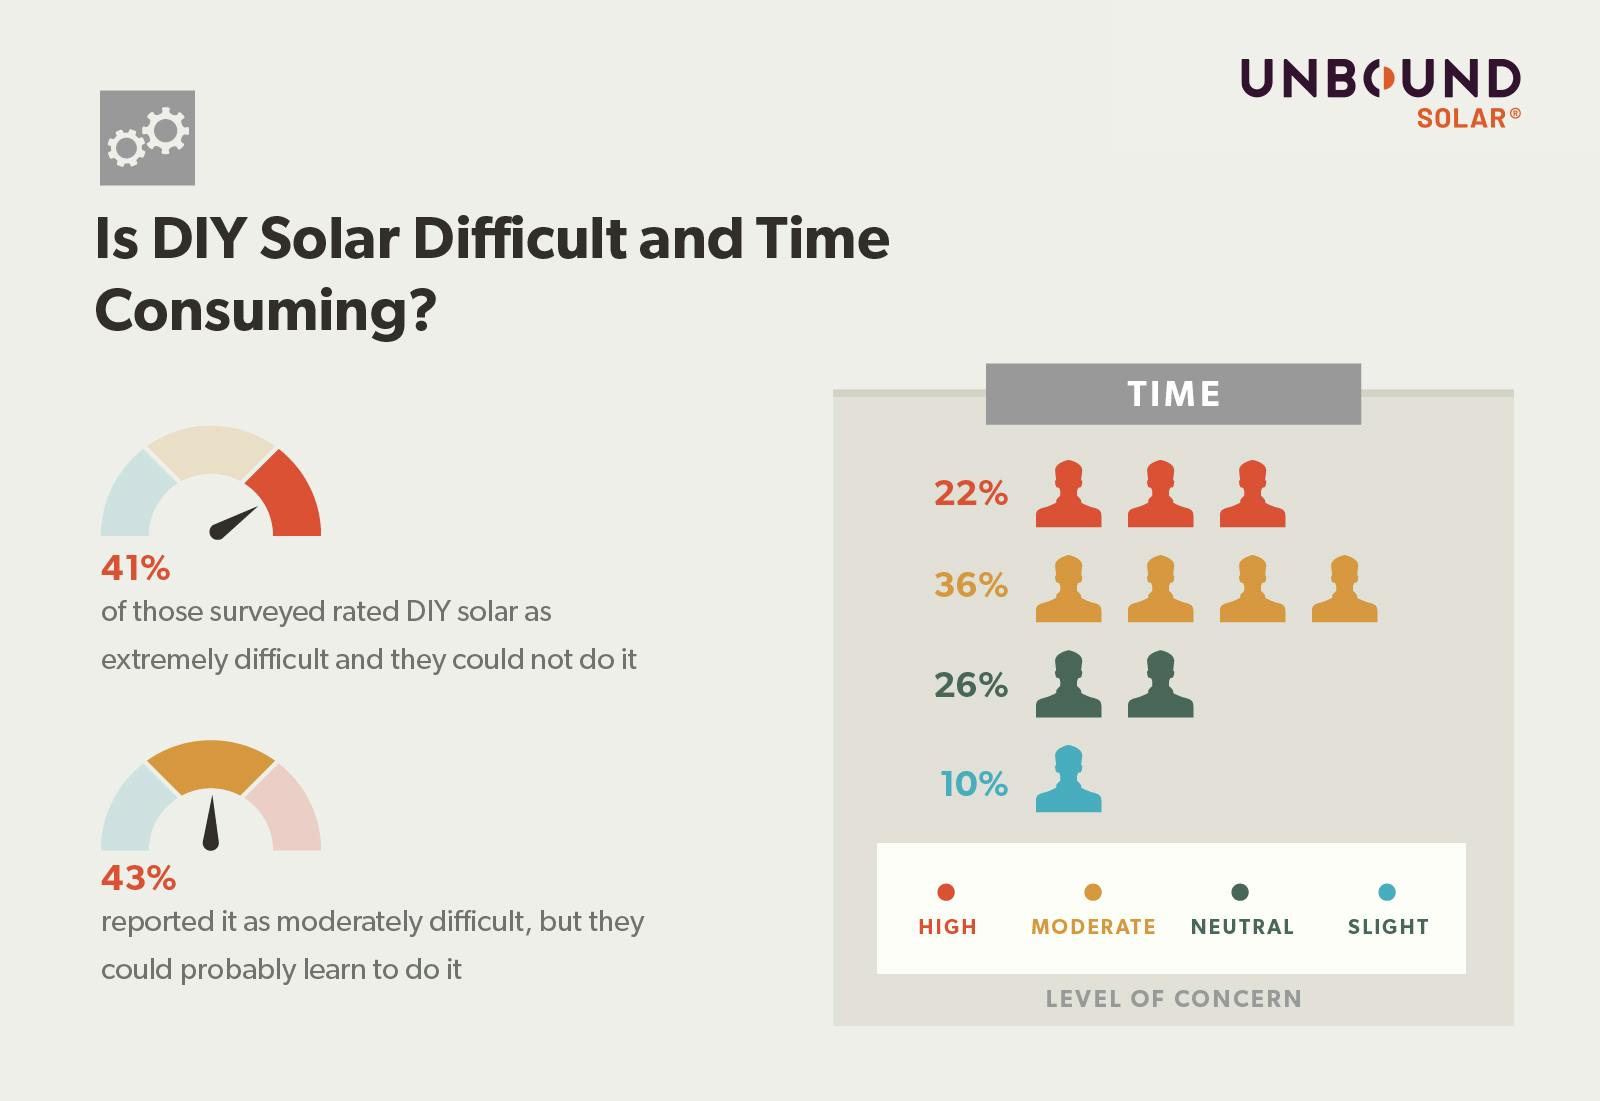 Graphic showing how difficult and time consuming survey participants think doing DIY solar would be with 41% thinking DIY solar would be extremely difficult, and 43% thinking it would be moderately difficult but they coil learn to do it. 22% concerned time involved a high concern, 36% considered it a moderate concern, 26% were neutral, and 10% a slight concern.